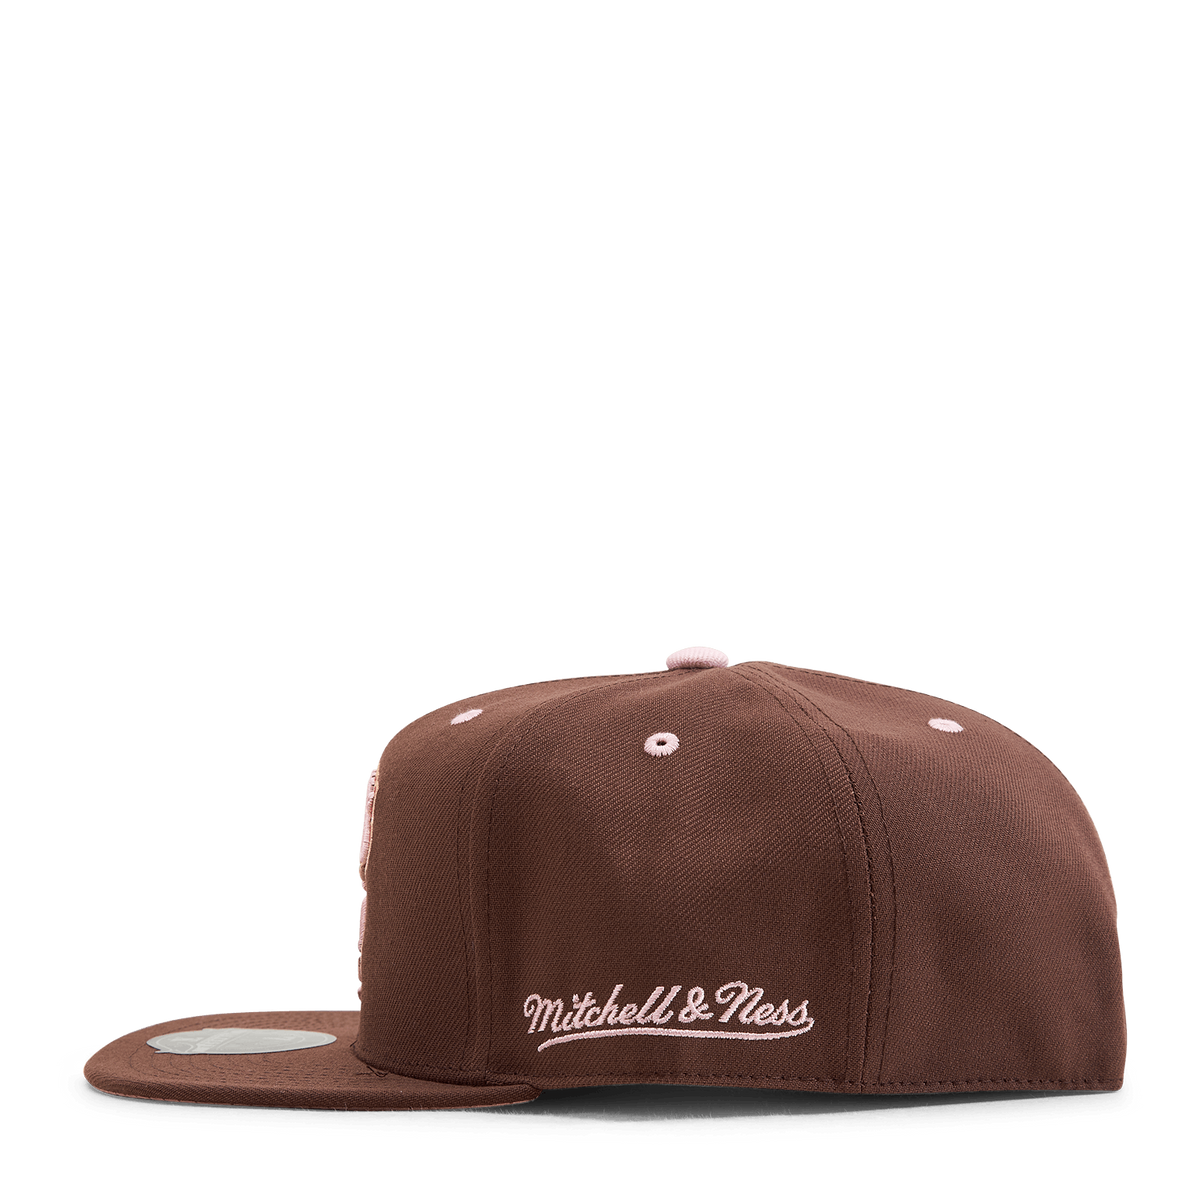 Knicks Brown Sugar Bacon Fitted HWC